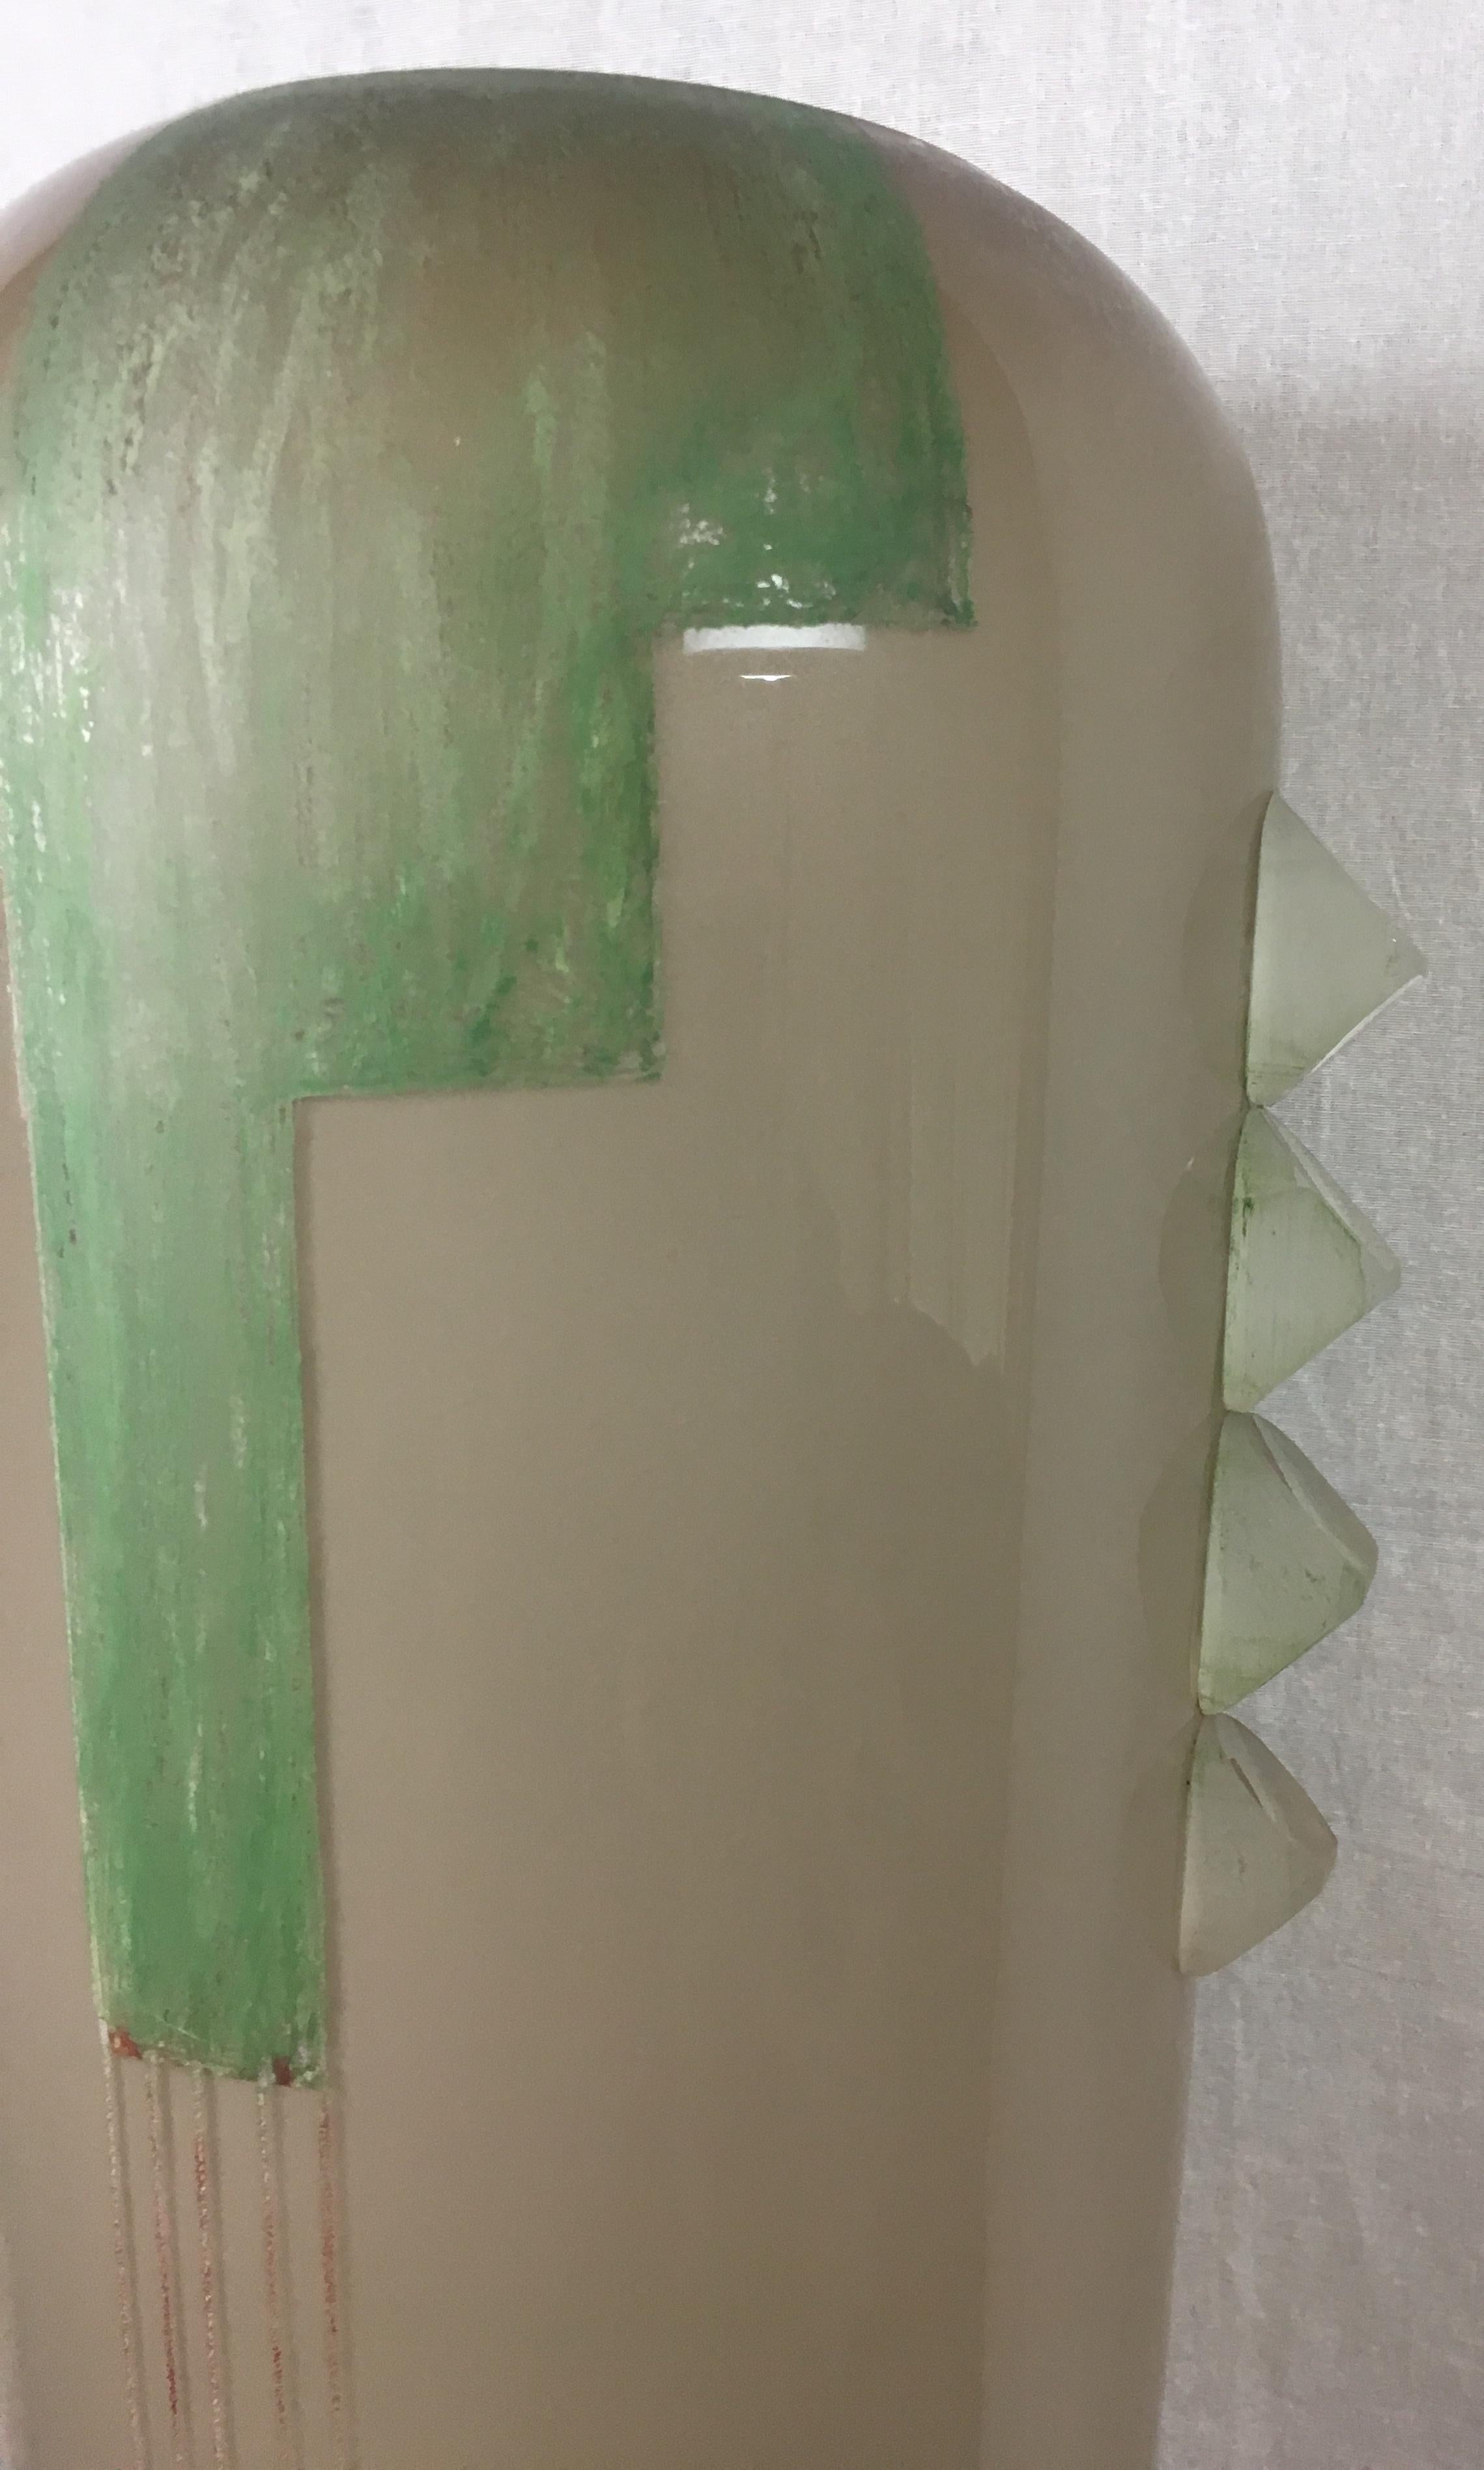 Hand-Crafted Art Deco Cubist Glass Floor Vase by Anatole Riecke, from La Coupole Brasserie For Sale